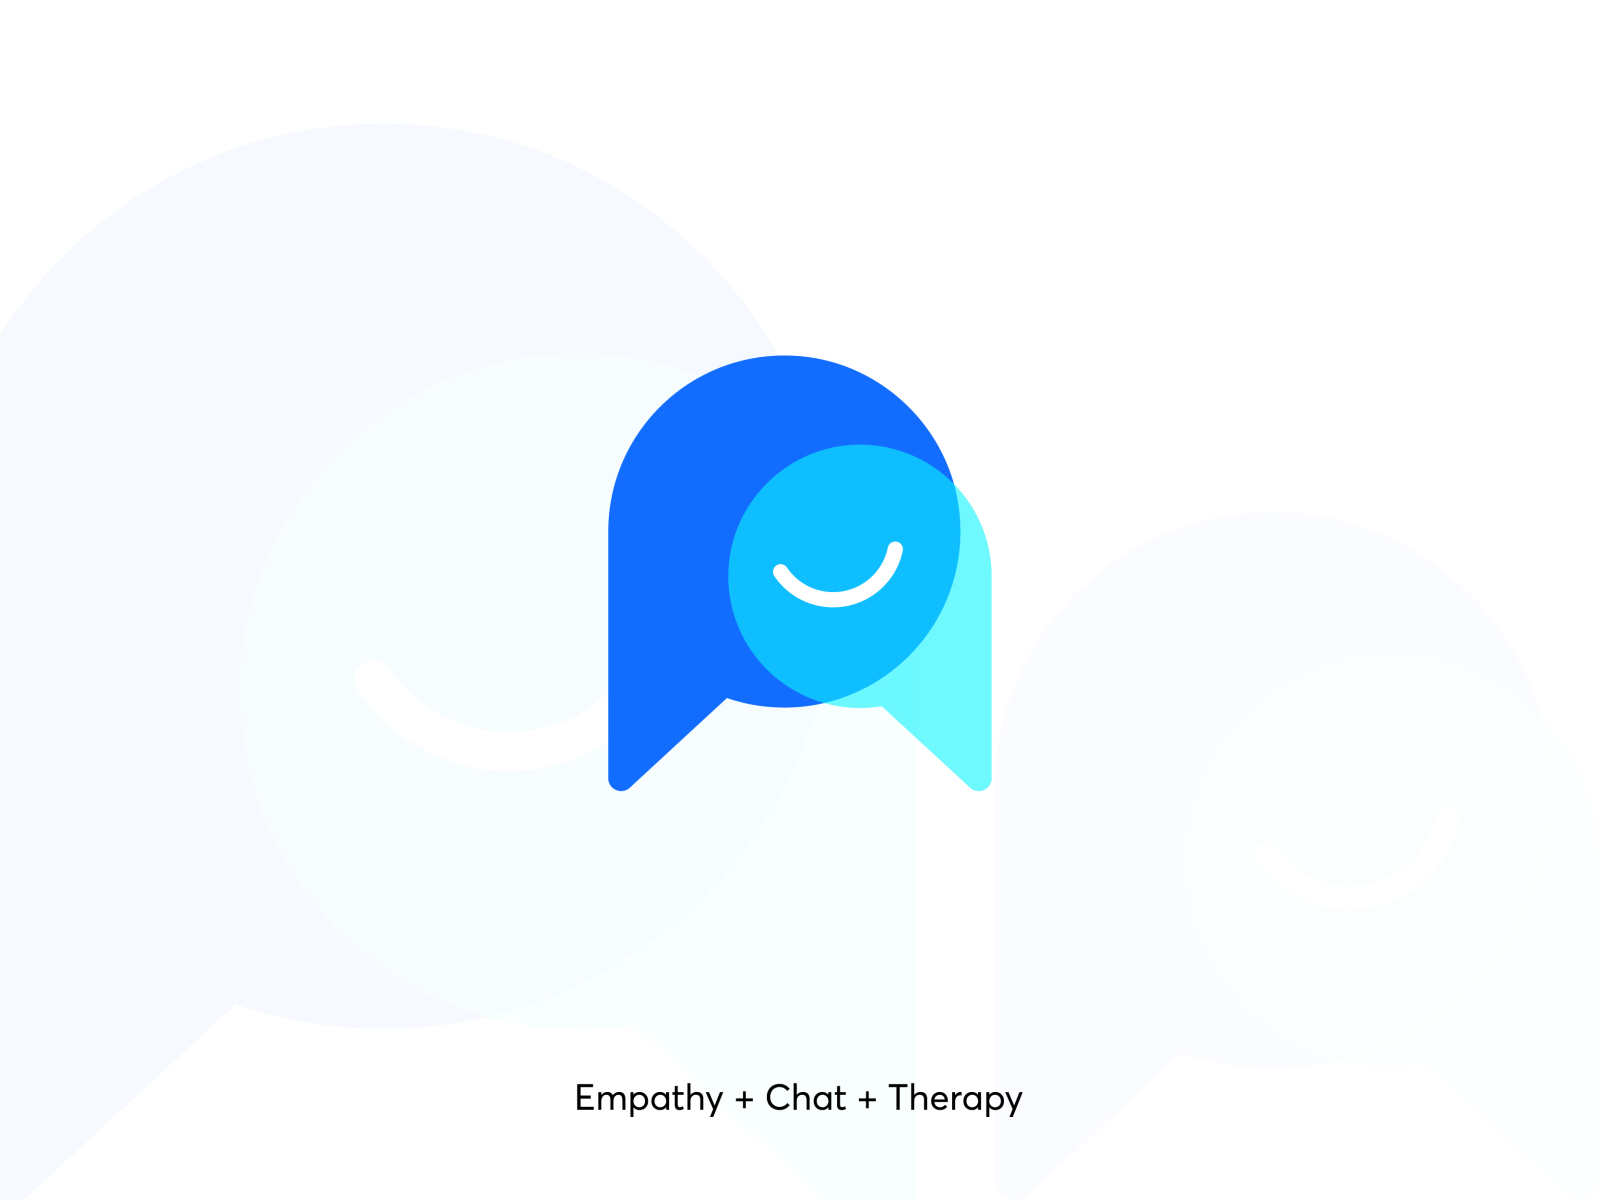 Online therapy chat